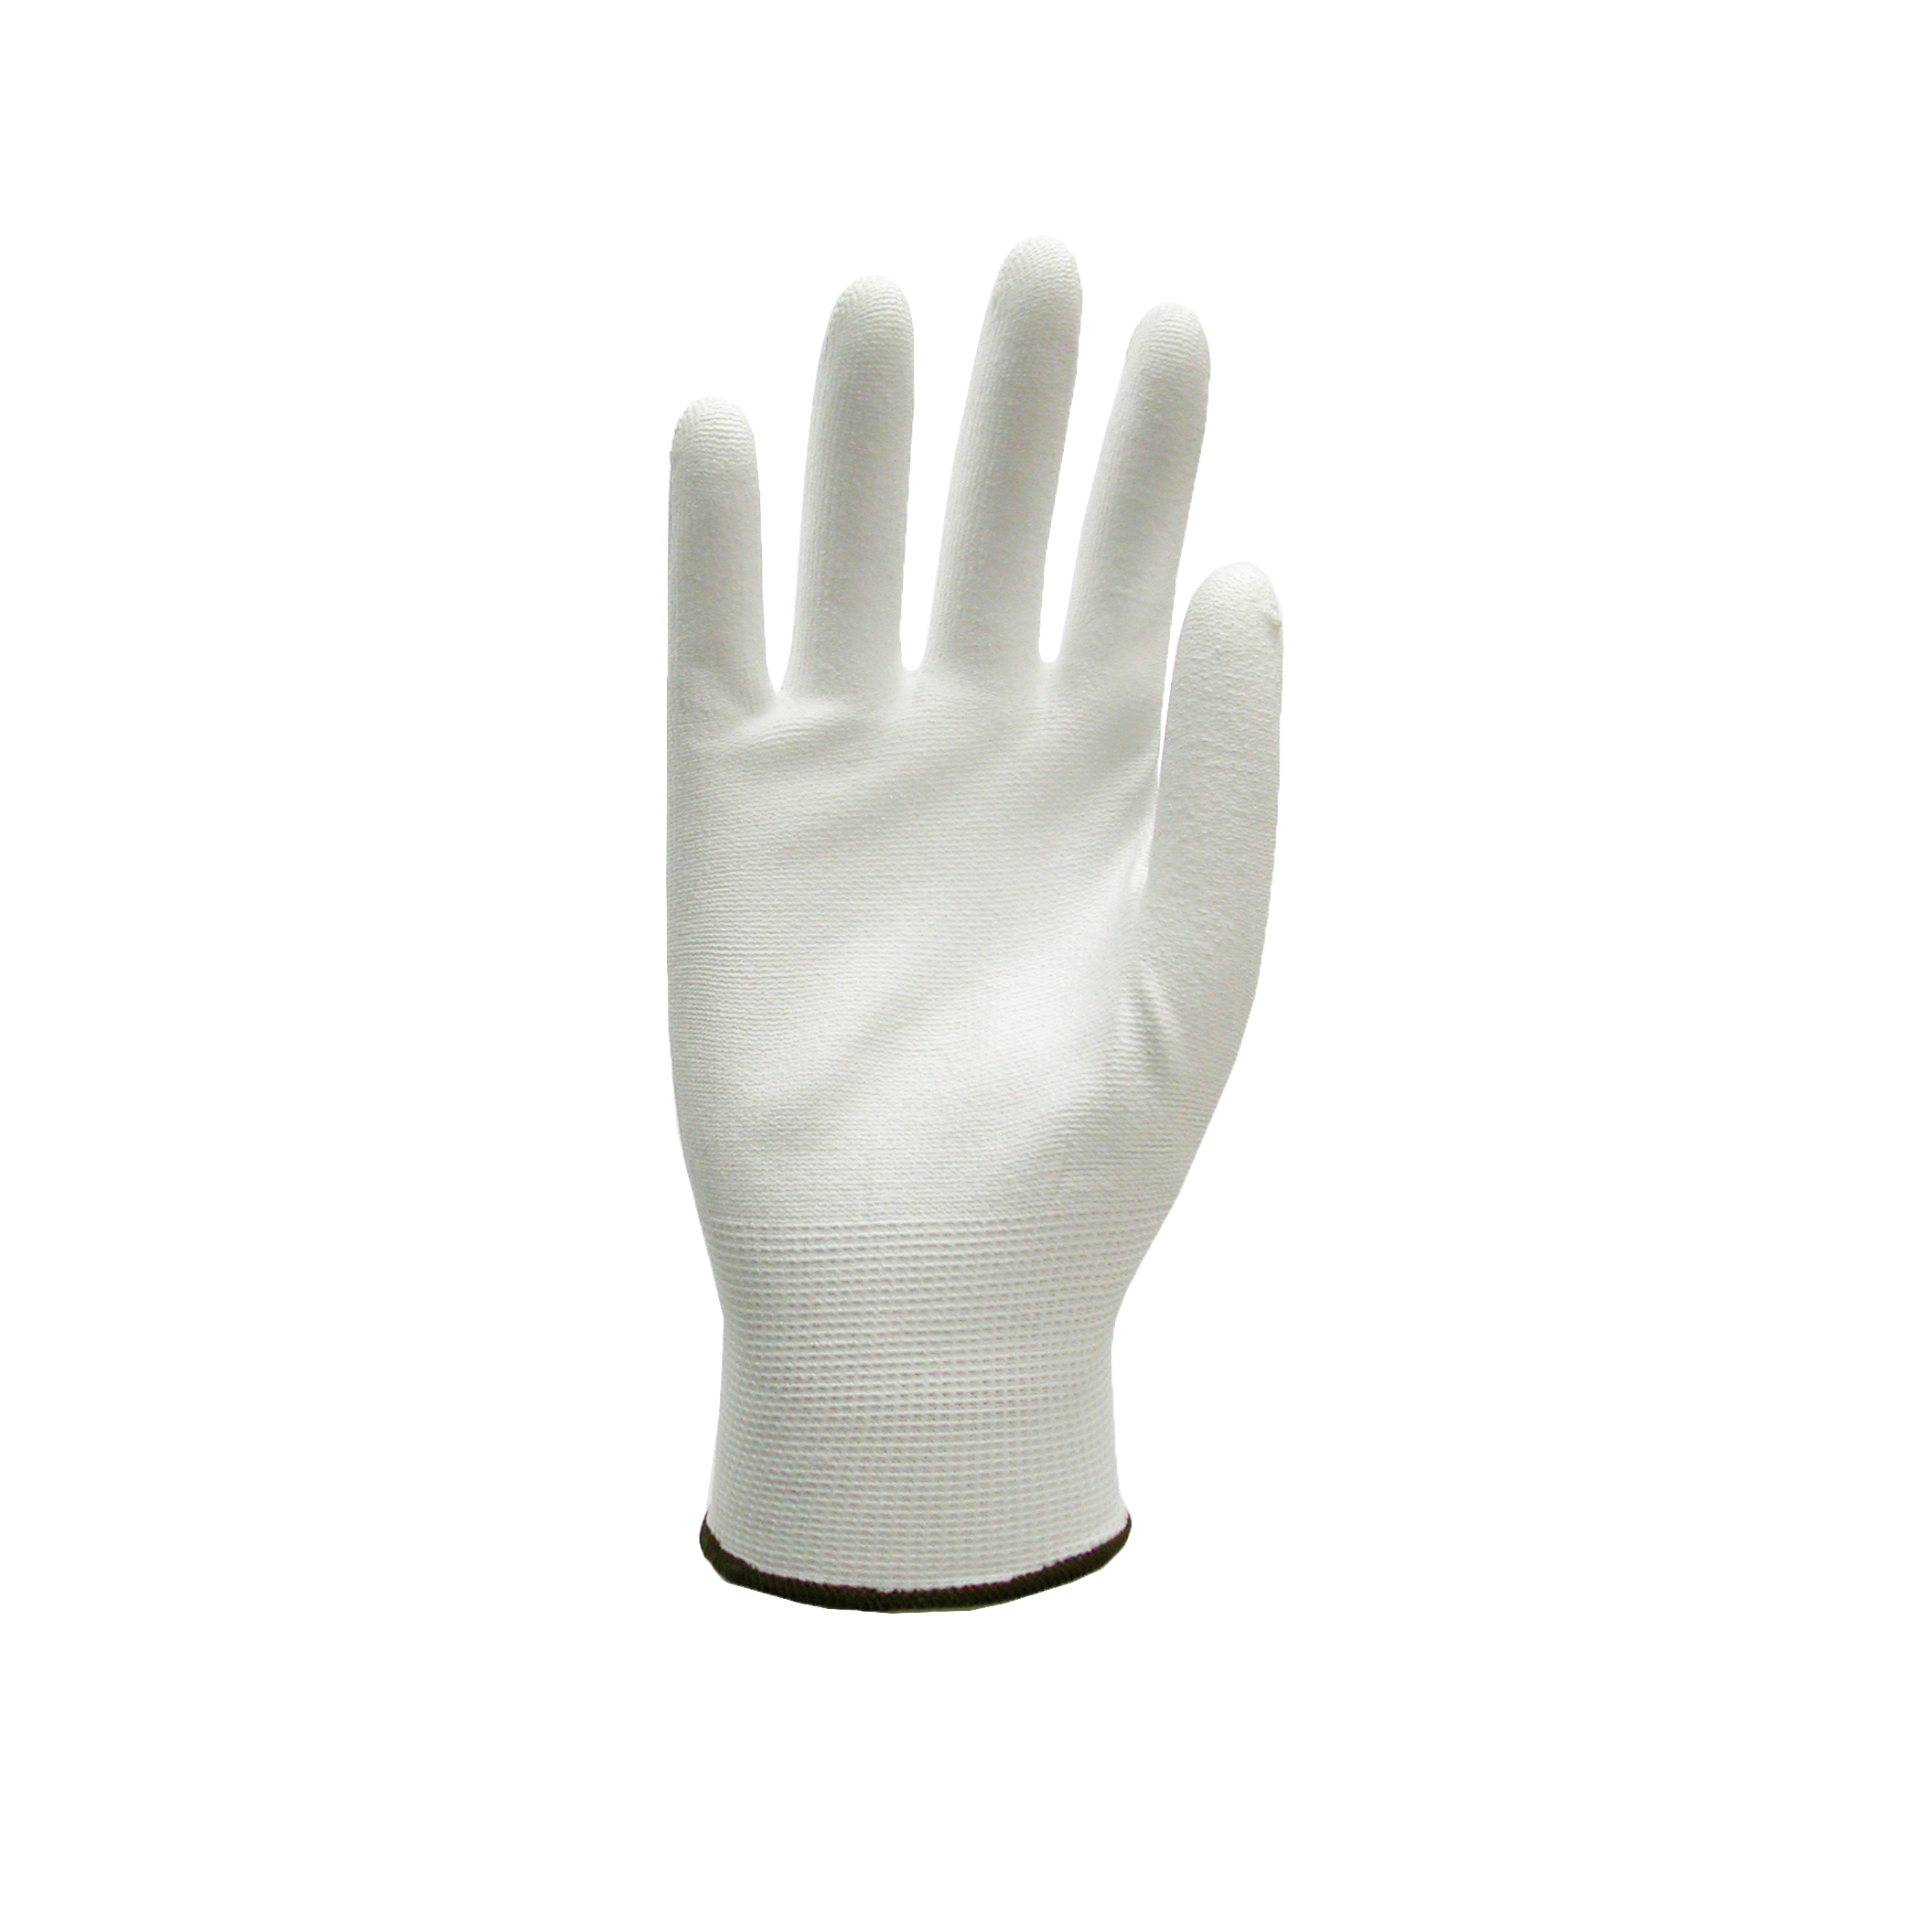 - Polyurethane Coated Gloves Hand Protection Safetyware